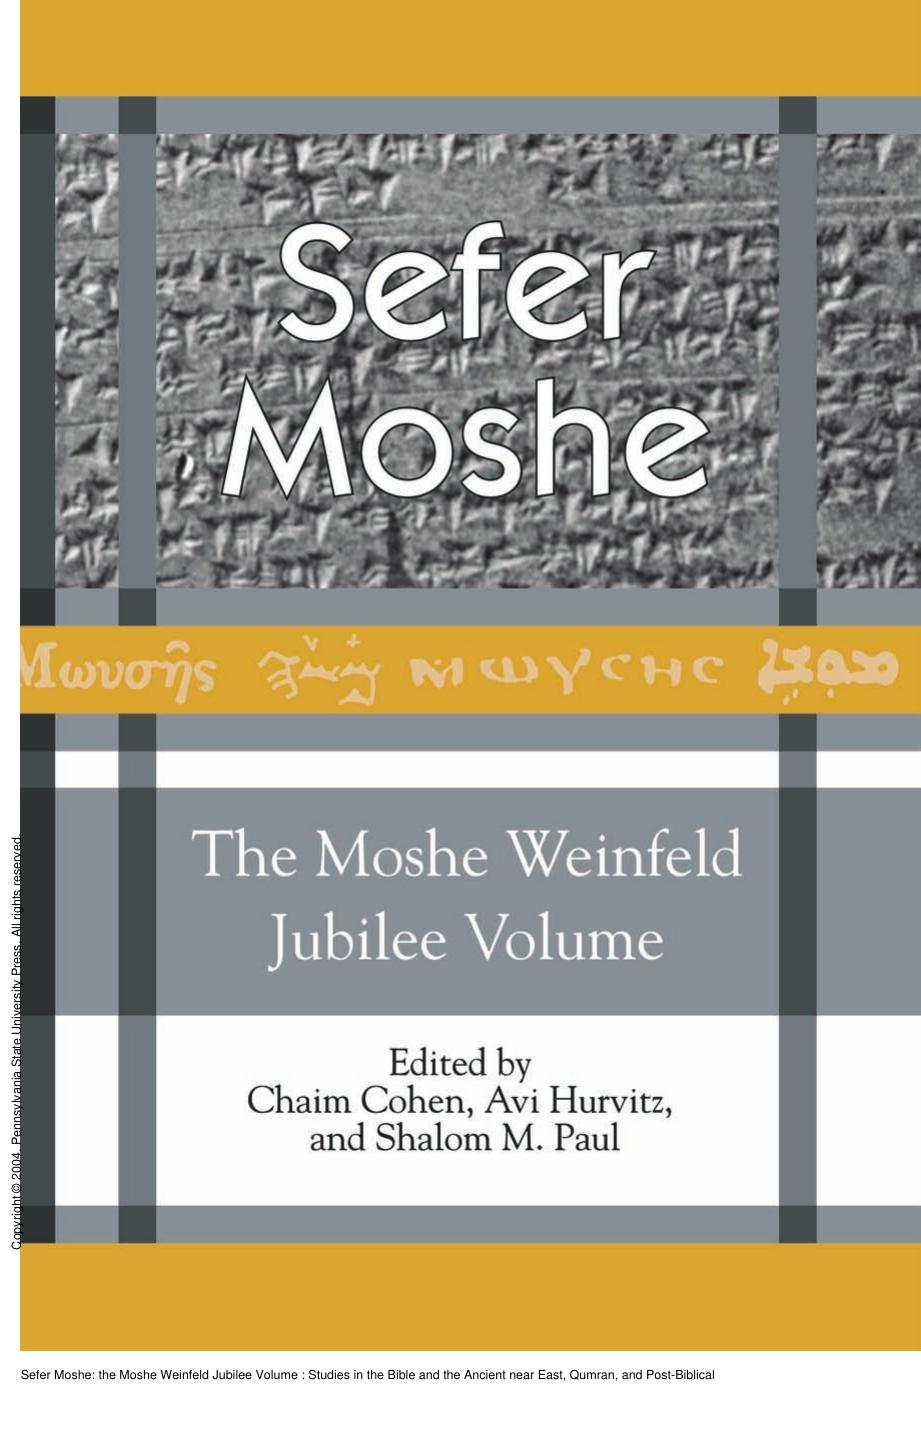 Sefer Moshe: the Moshe Weinfeld Jubilee Volume : Studies in the Bible and the Ancient near East, Qumran, and Post-Biblical Judaism by Chaim Cohen; Avi M. Hurvitz; Shalom M. Paul